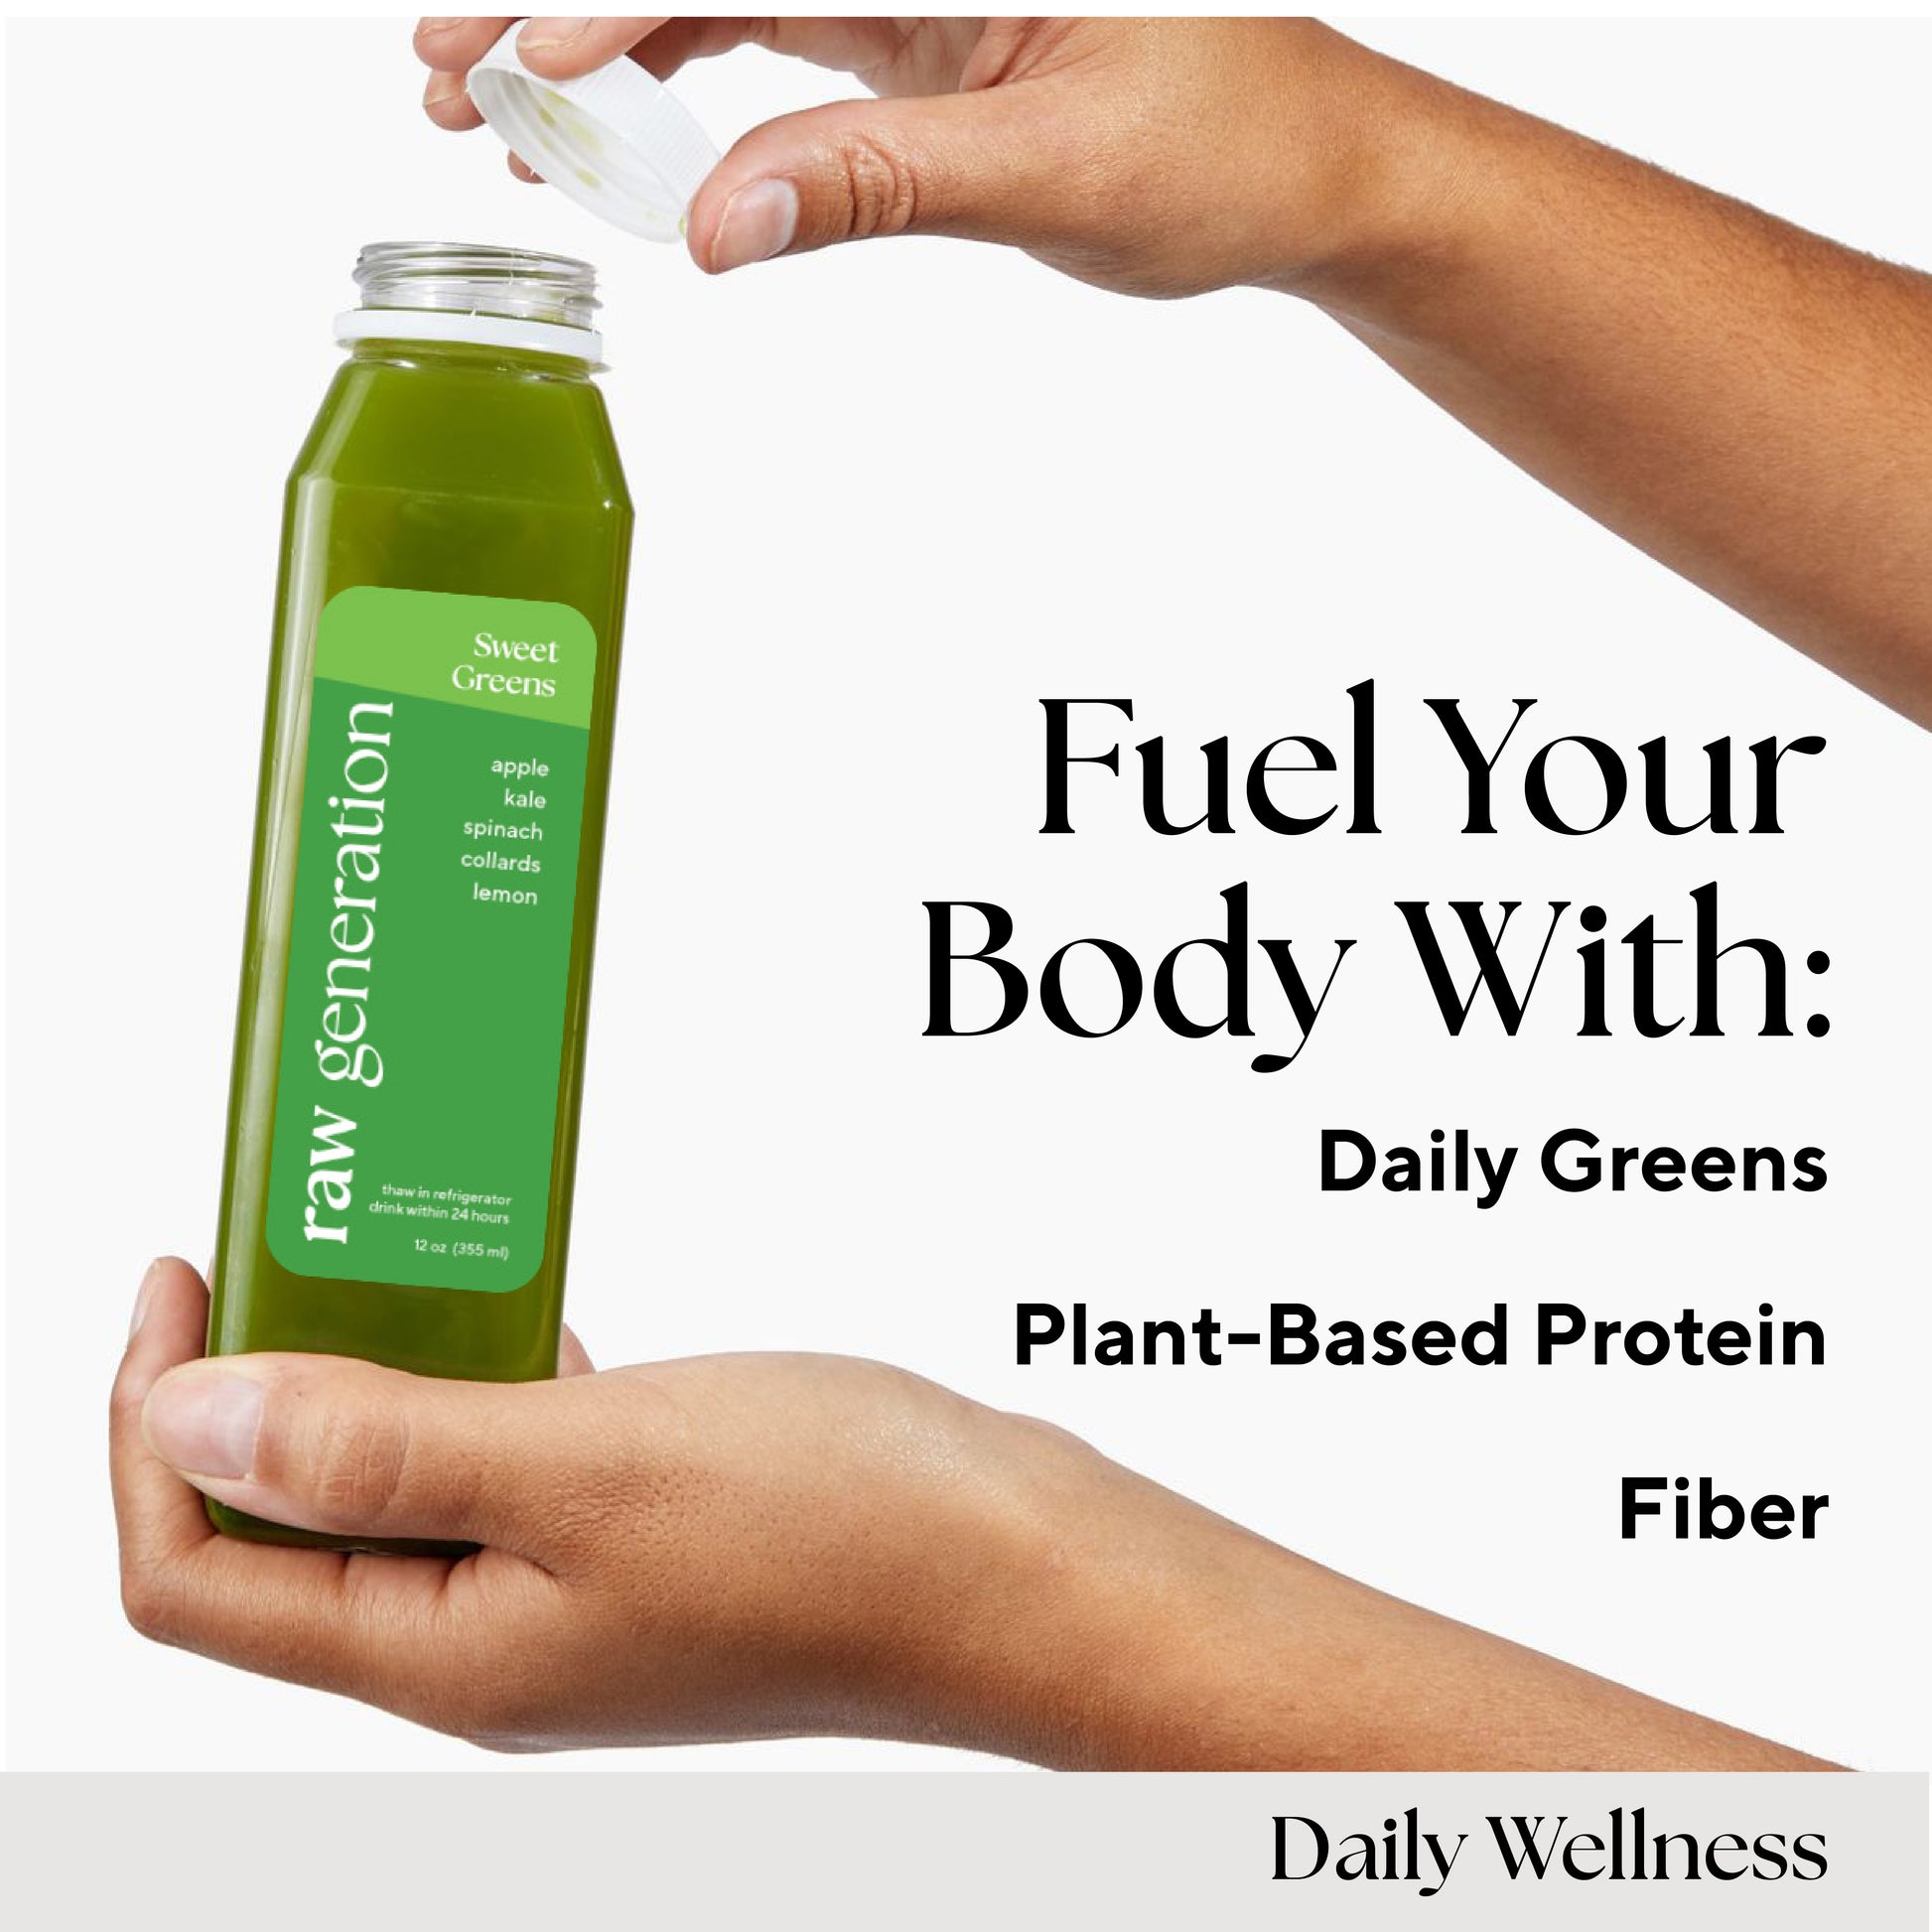 Photograph displaying a bottle of Sweet Greens juice, accompanied by text that reads "Fuel Your Body With Daily Greens, Plant-Based Protein and Fiber"